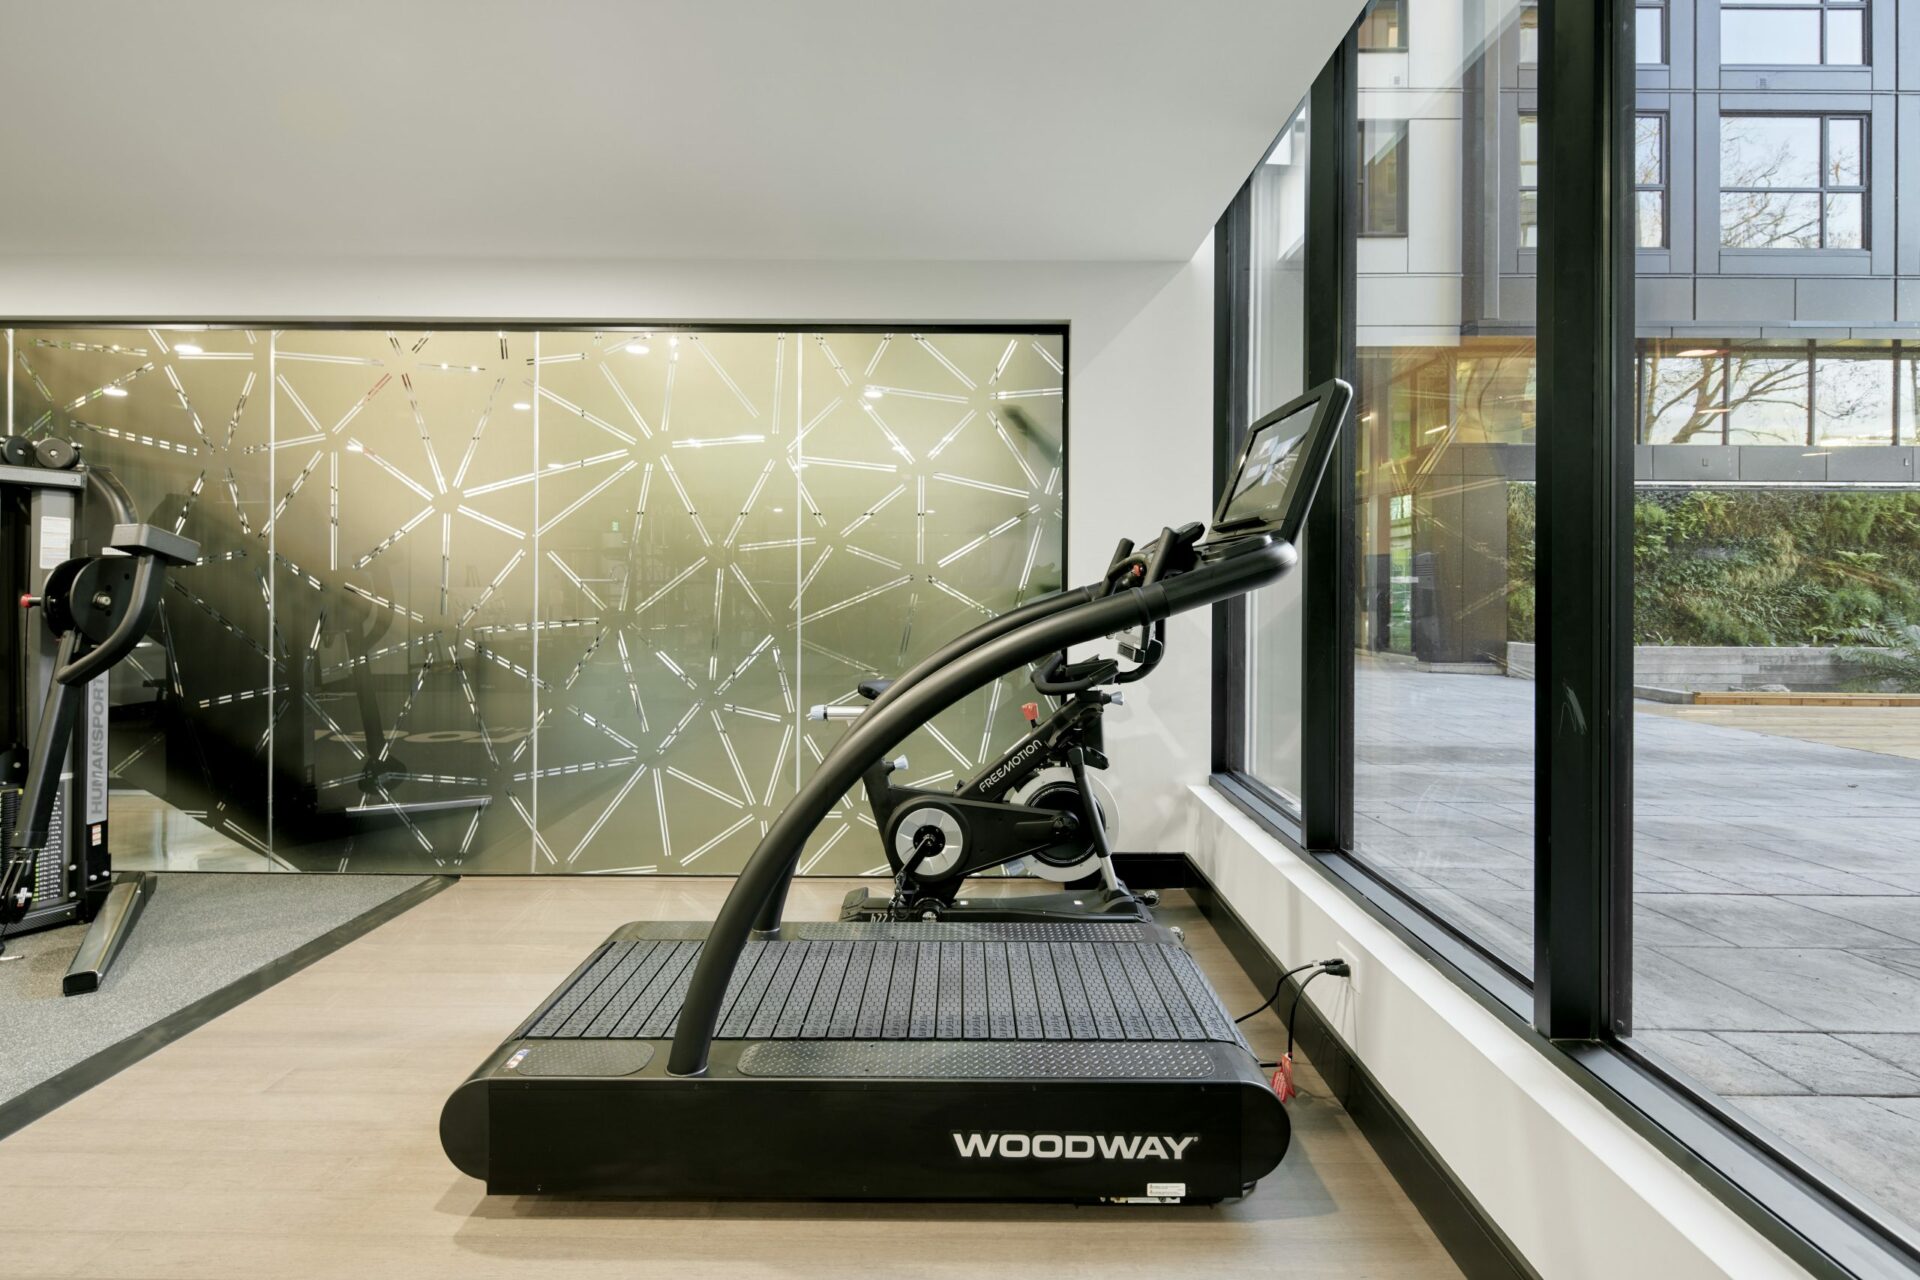 The Logan apartments with woodway treadmills